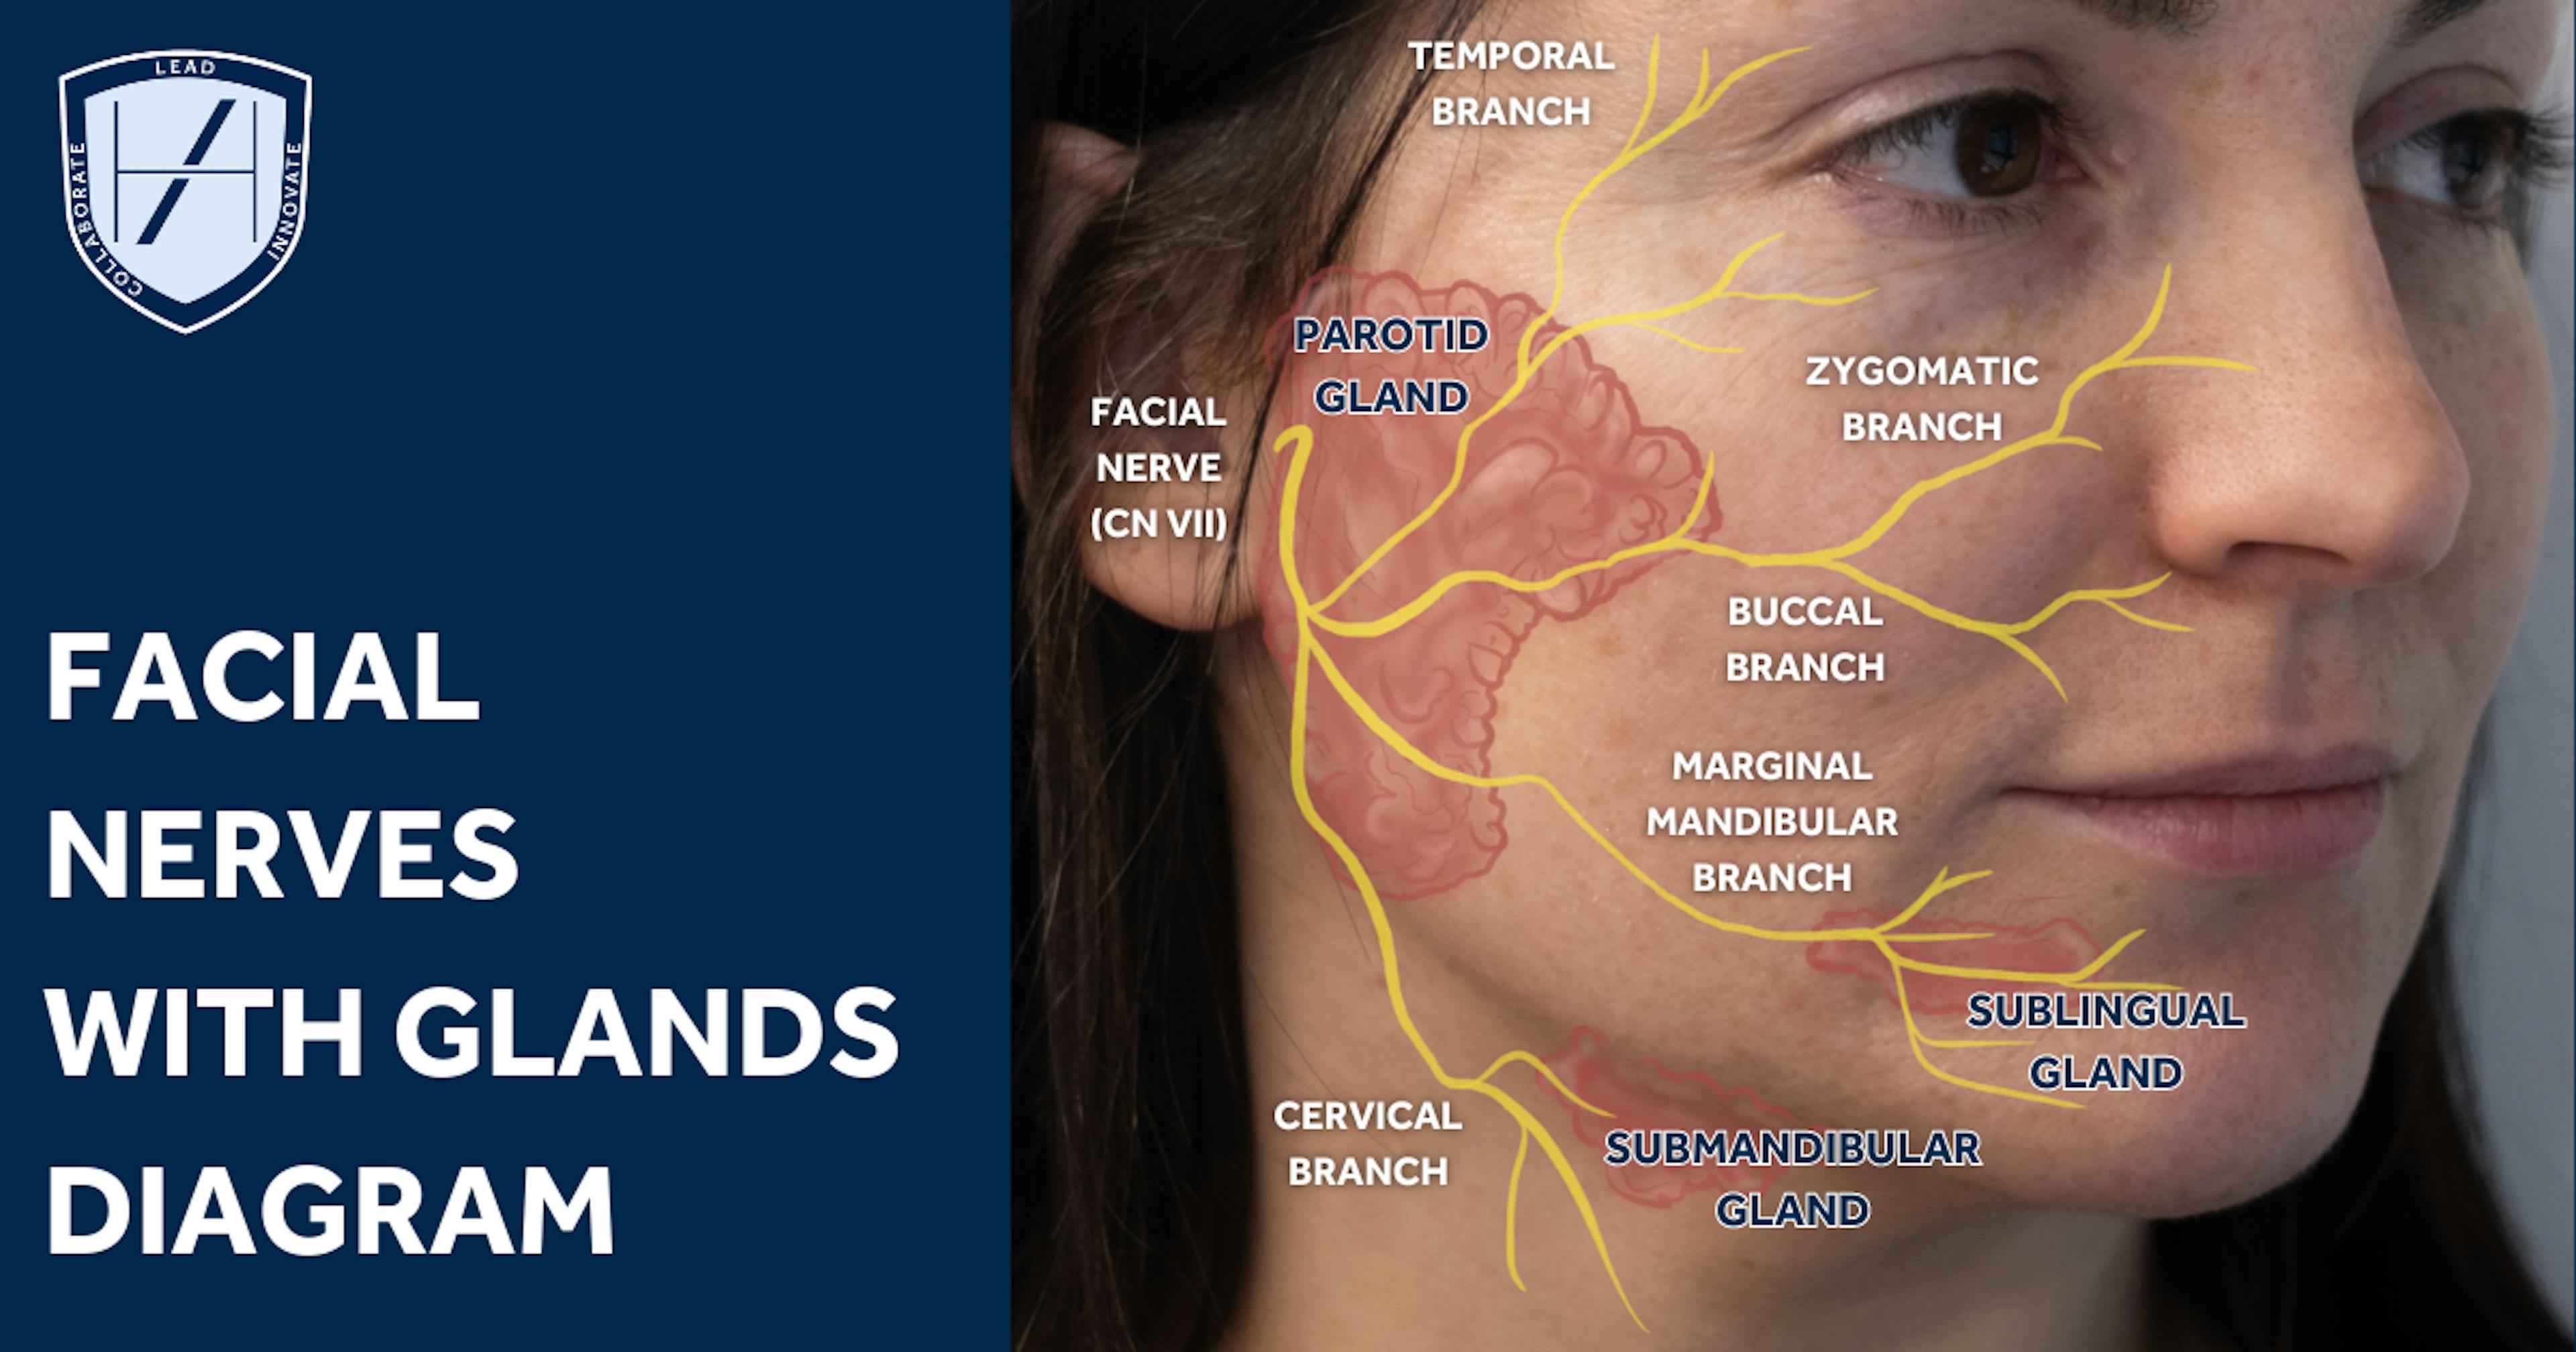 Facial nerves with glands - facial anatomy diagram for aesthetics practitioners